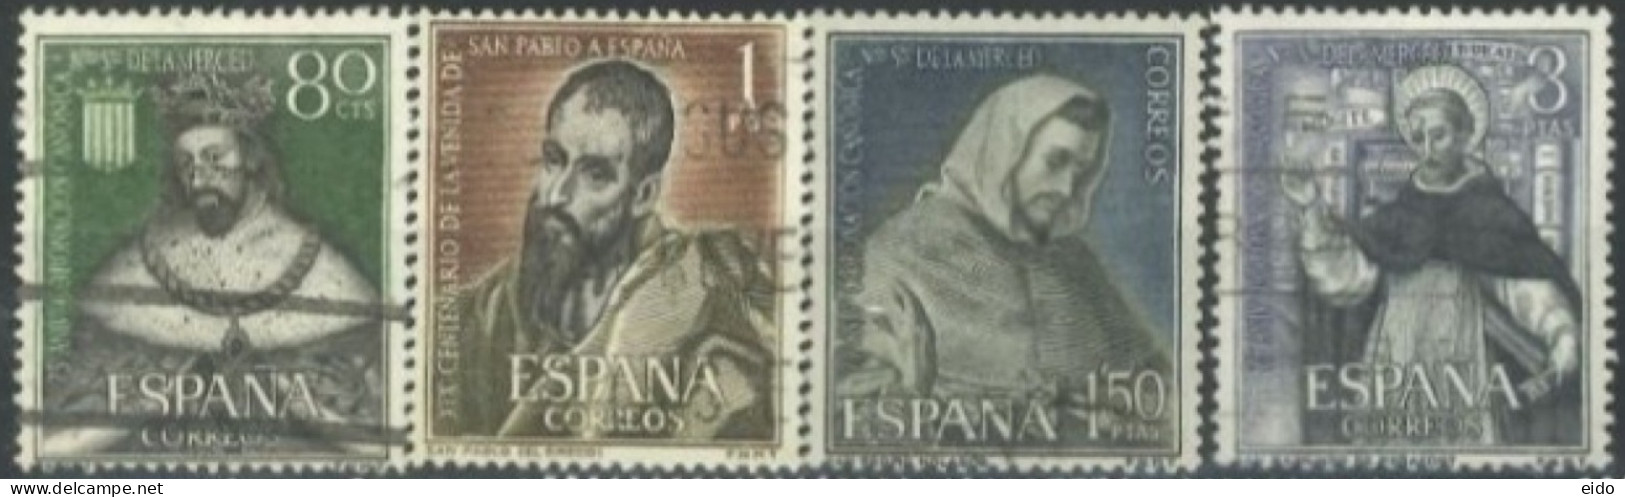 SPAIN, 1963, STAMPS SET OF 4, USED. - Used Stamps